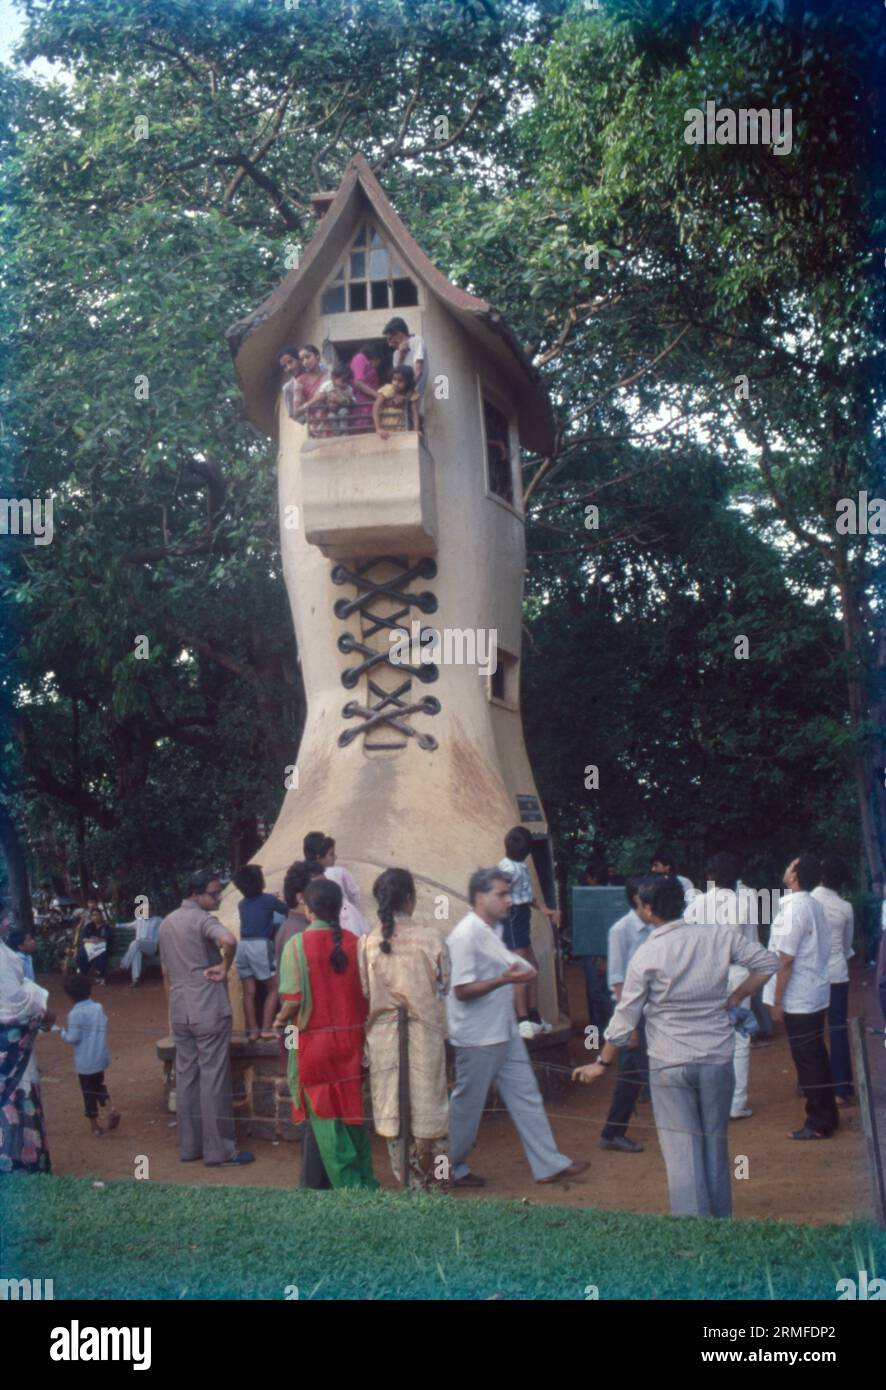 Kamla Nehru Park “Built in 1952, Kamla Nehru Park (Also called 'Old Women Shoe, Boot House, and Juta Ghar') was a gift to the kids of Mumbai from Chacha Nehru. The name 'Kamla' was his wife's name, which is why the park is called. Big Shoe House. Mumbai, India Stock Photo